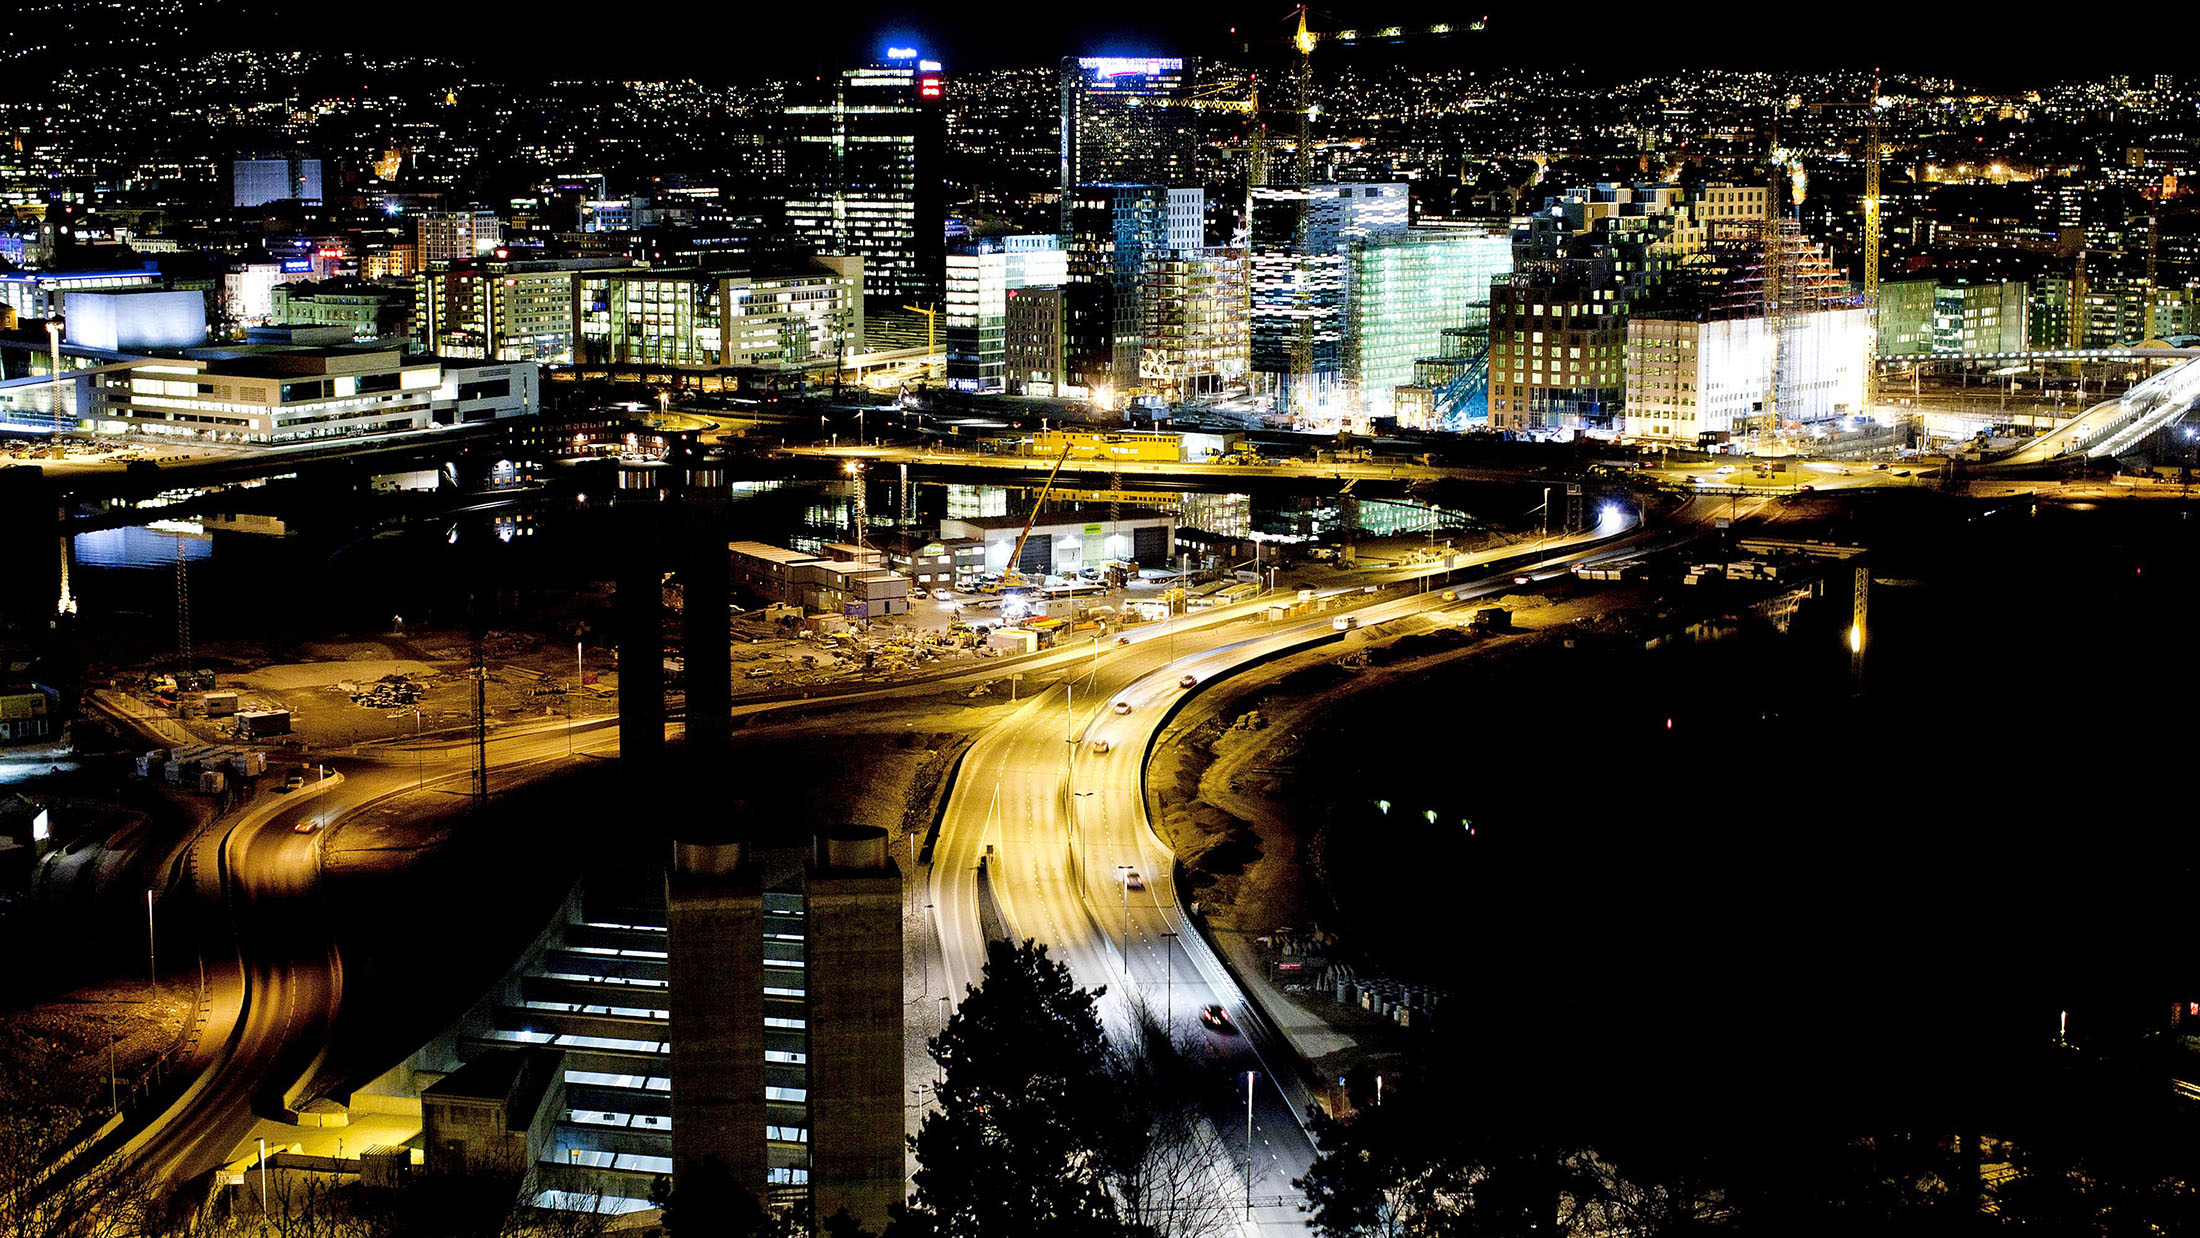 The city center skyline stands illuminated at night, seen from the Ekeberg hill, in Oslo.
